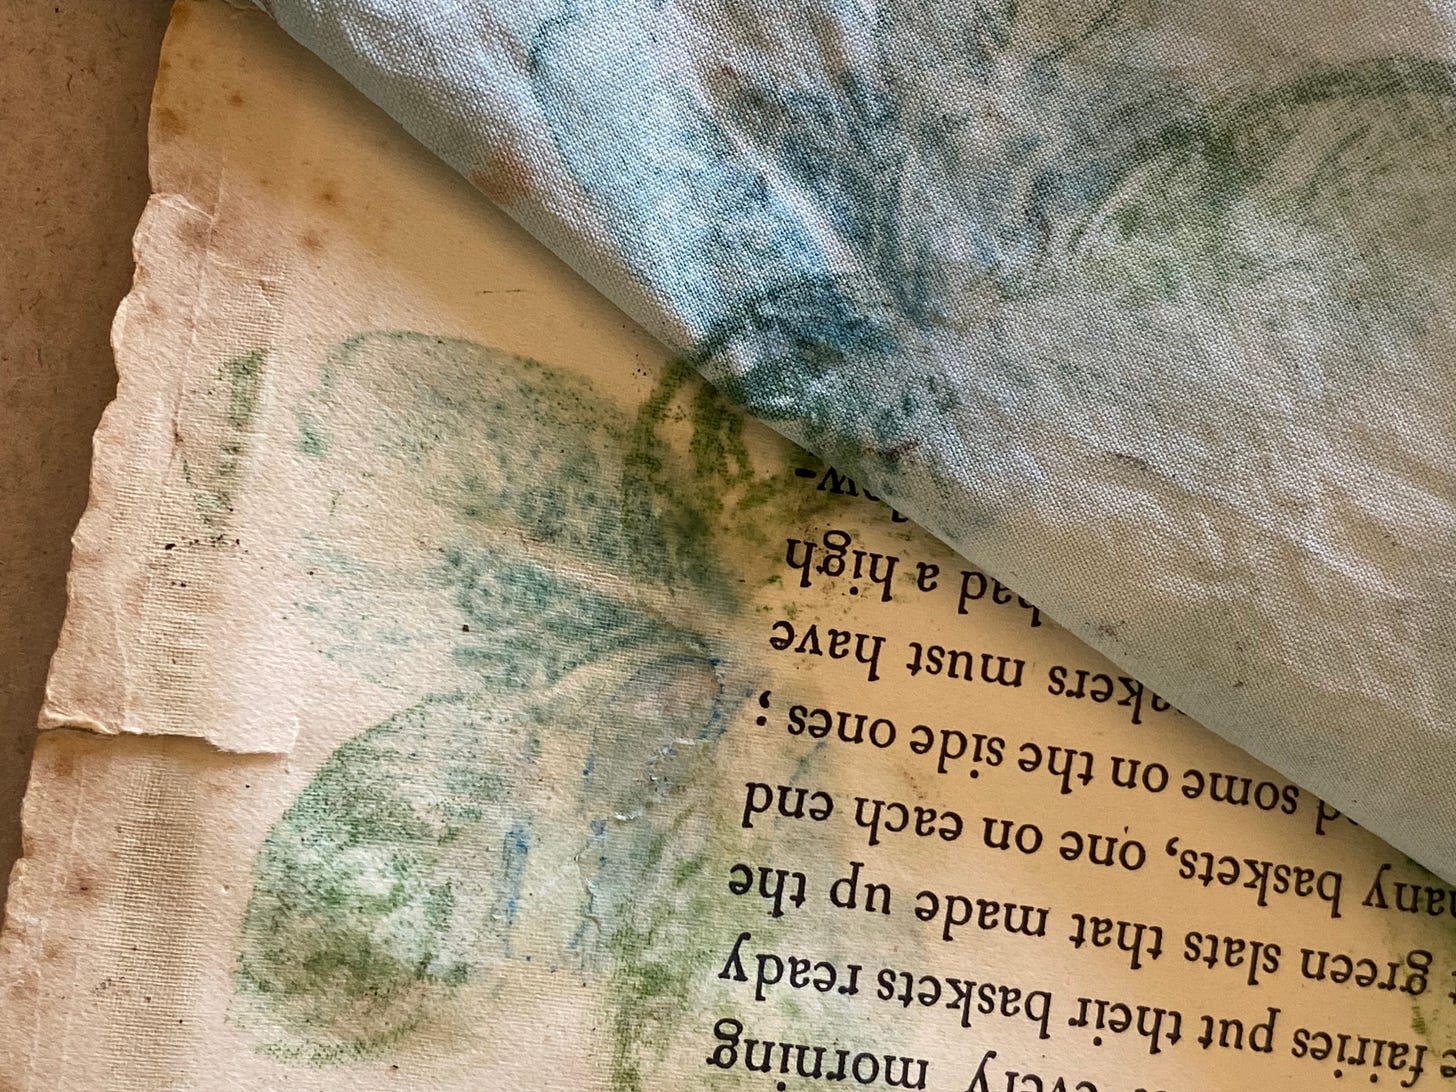 an indigo leaf print on a sheet of vintage paper in teal greens reflected in a folded back piece of cloth that divides the image diagonally